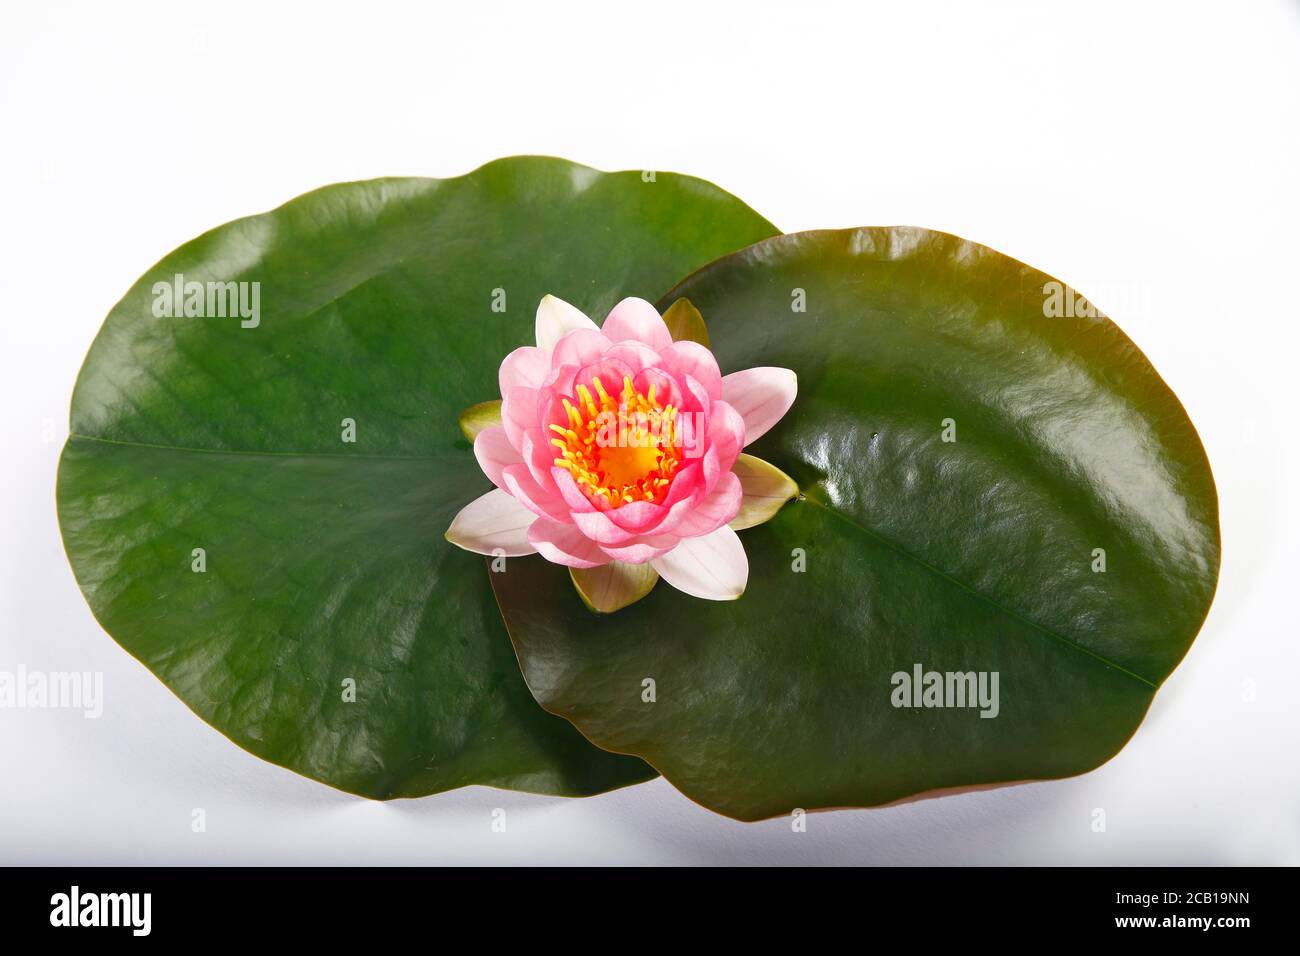 Water lily (Nymphaea), flower and leaves, Germany Stock Photo